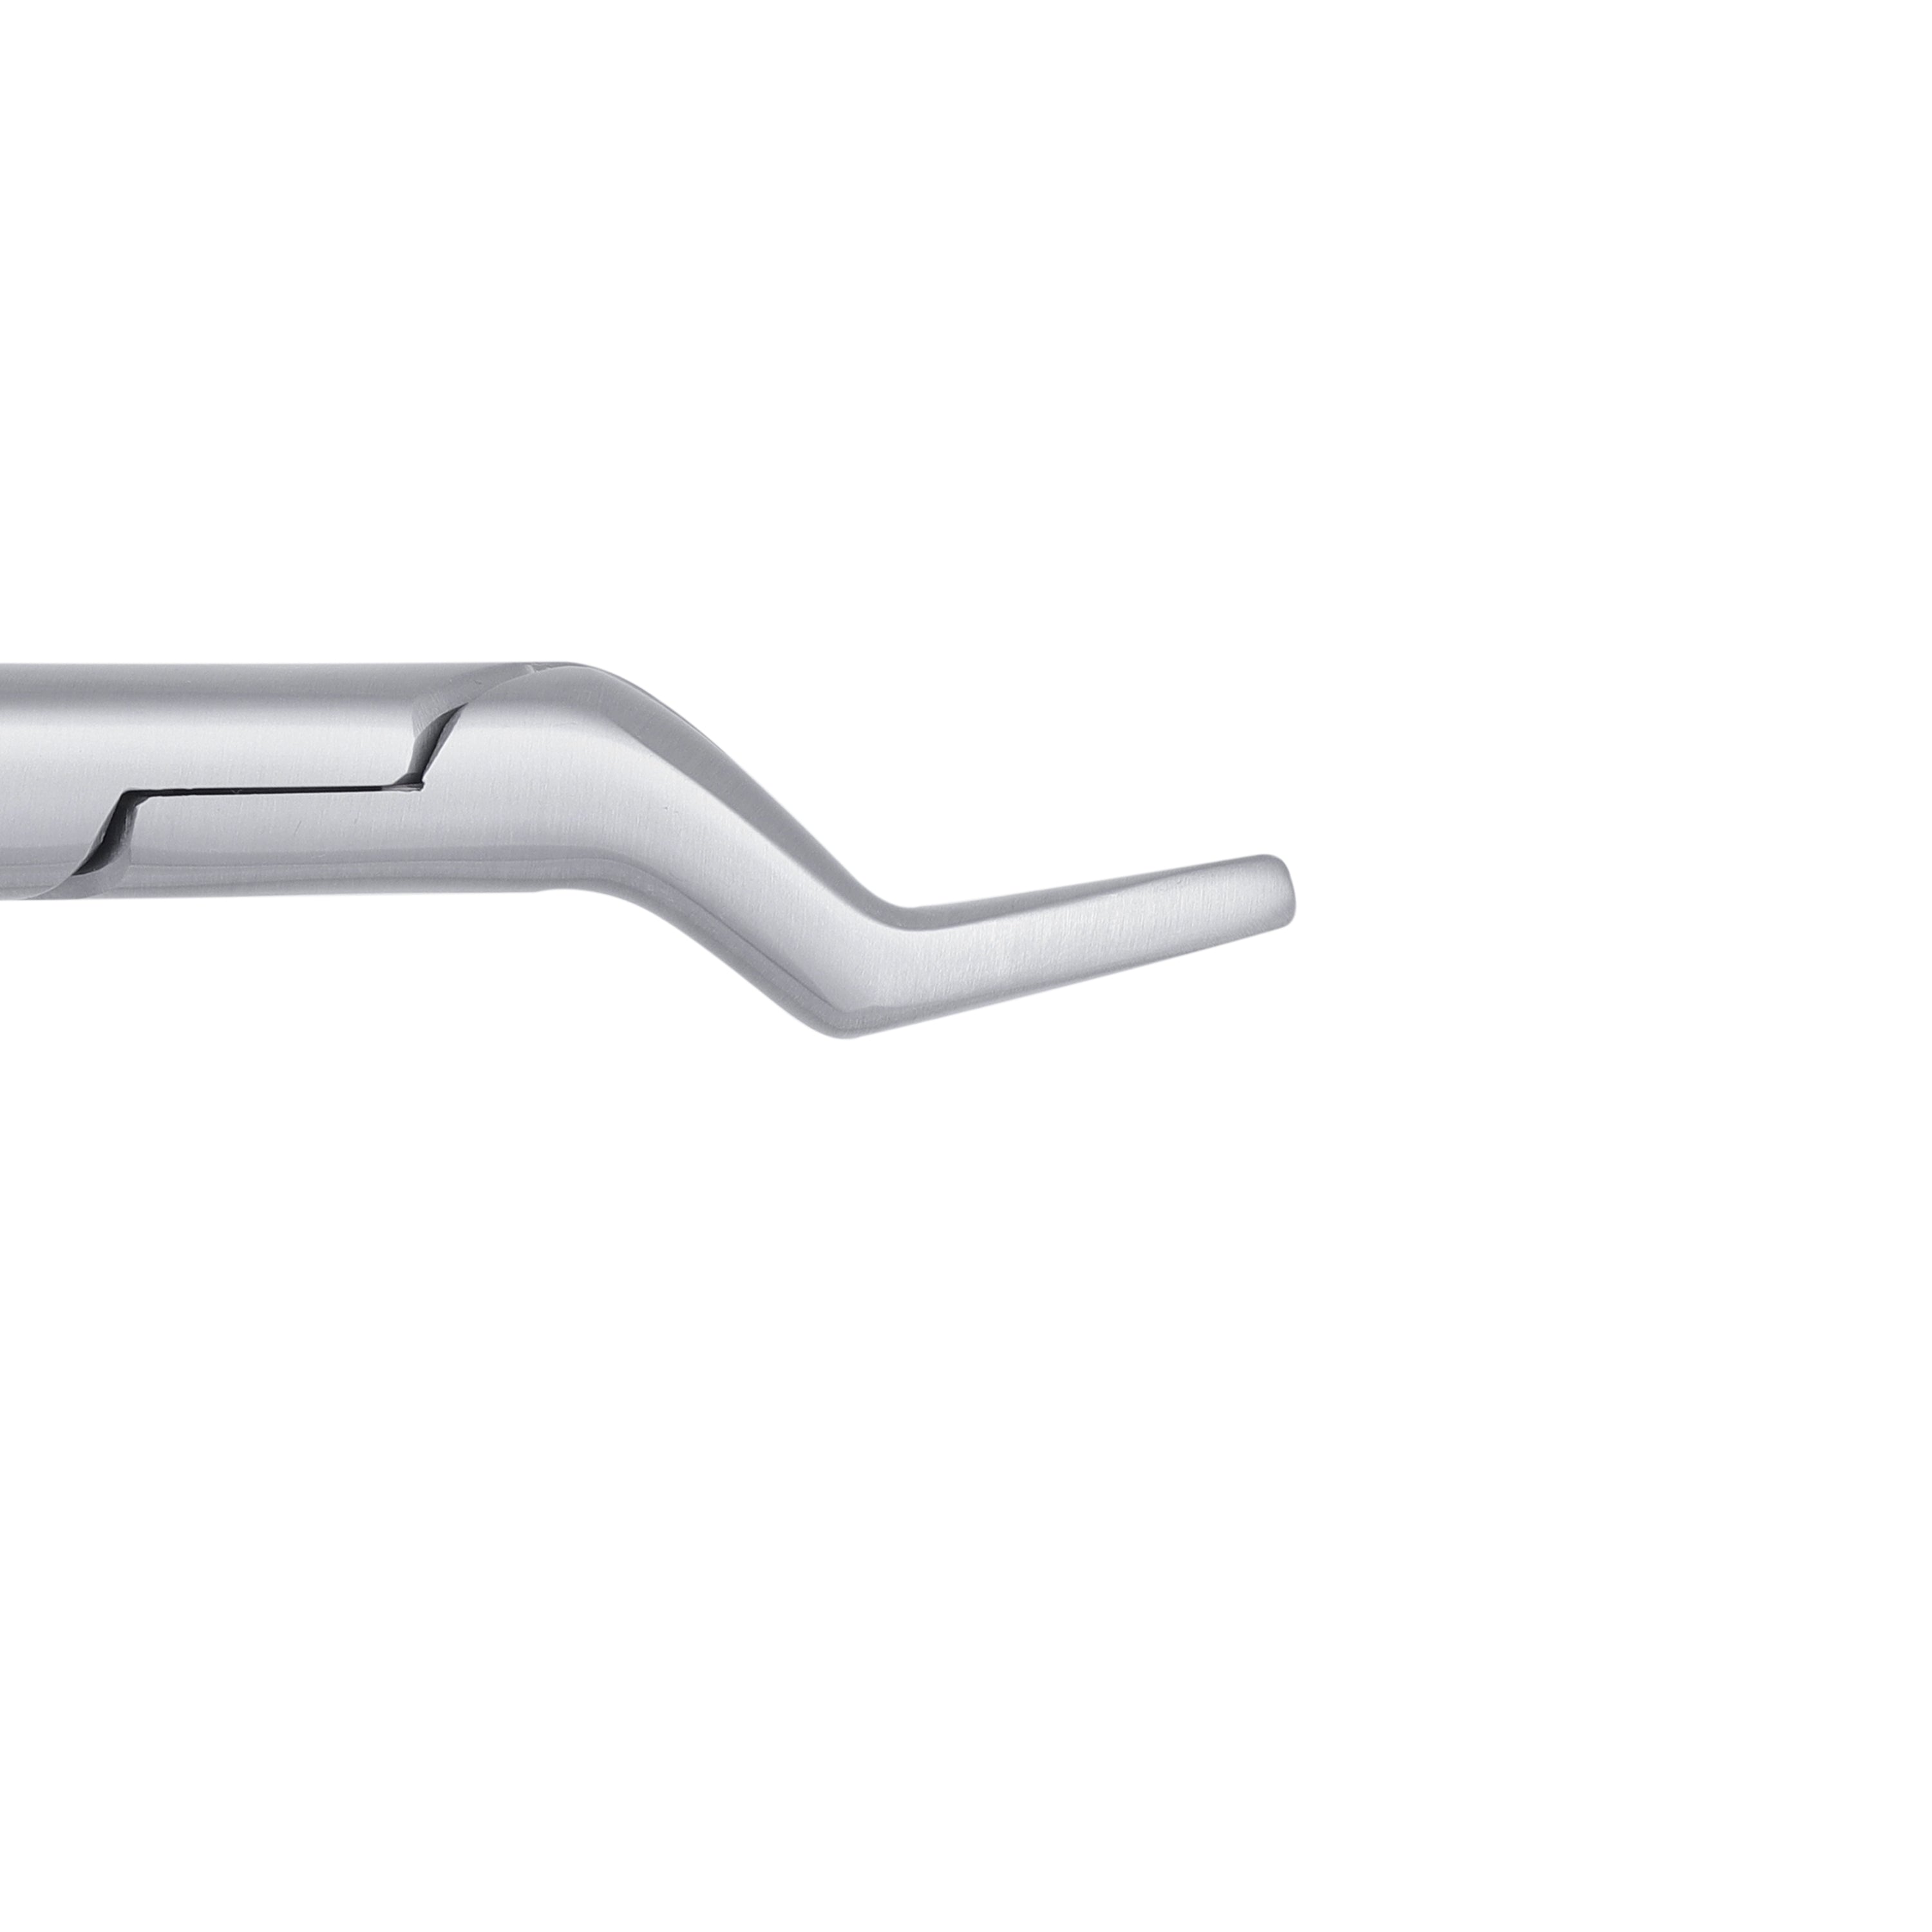 65 Upper Roots, Fragments & Overlapping Incisors Extraction Forceps - HiTeck Medical Instruments